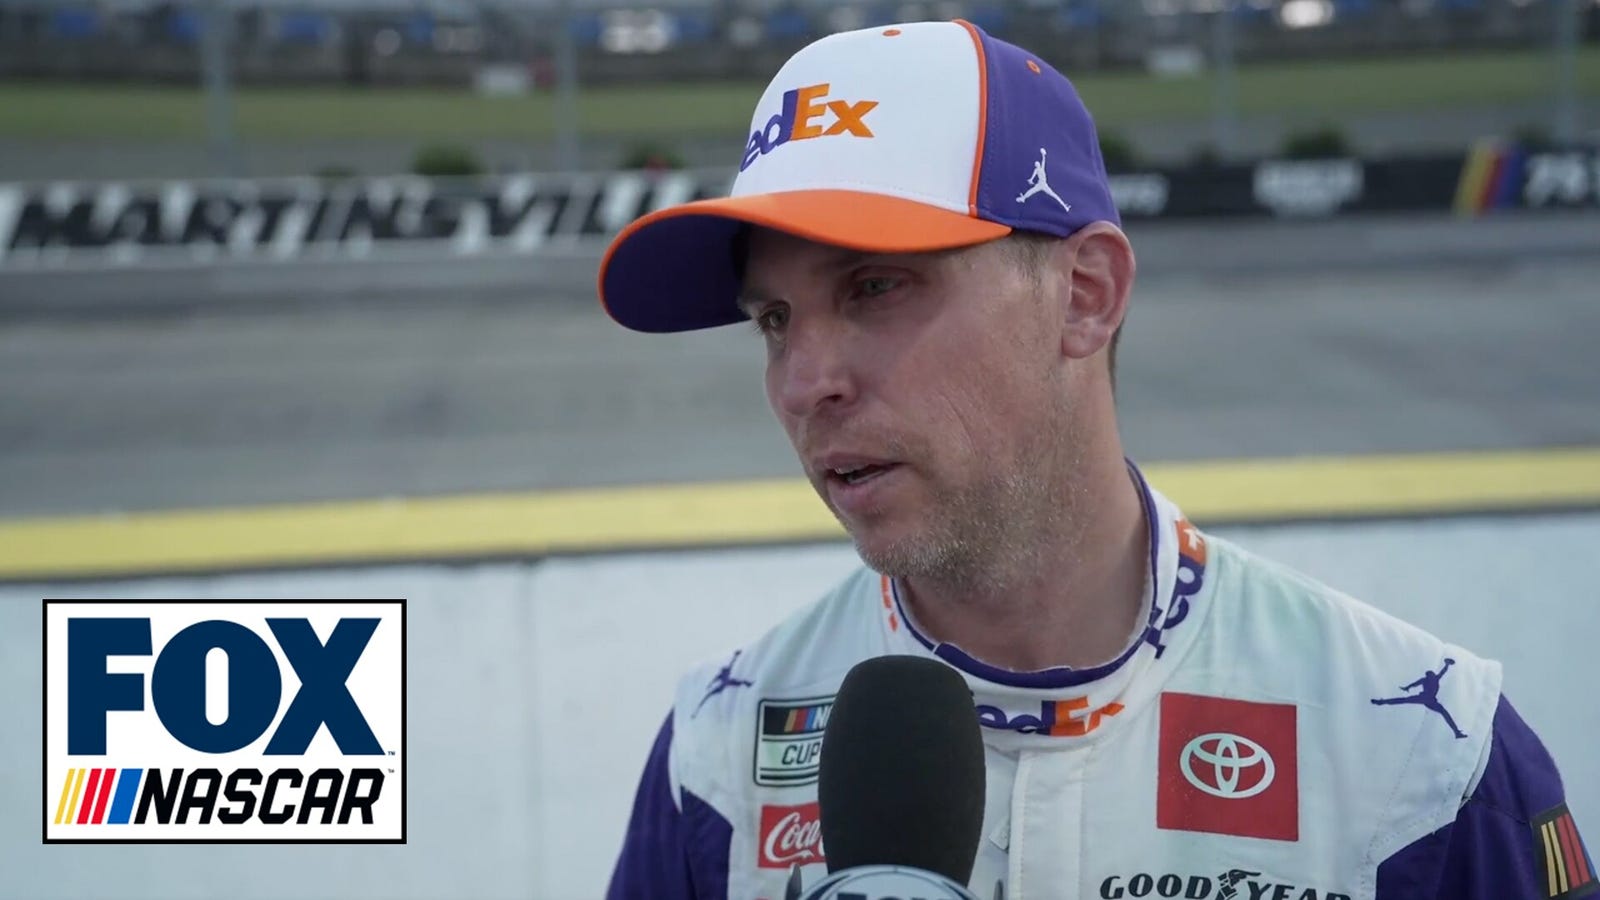 Denny Hamlin explains what was going through his mind lat at Martinsville